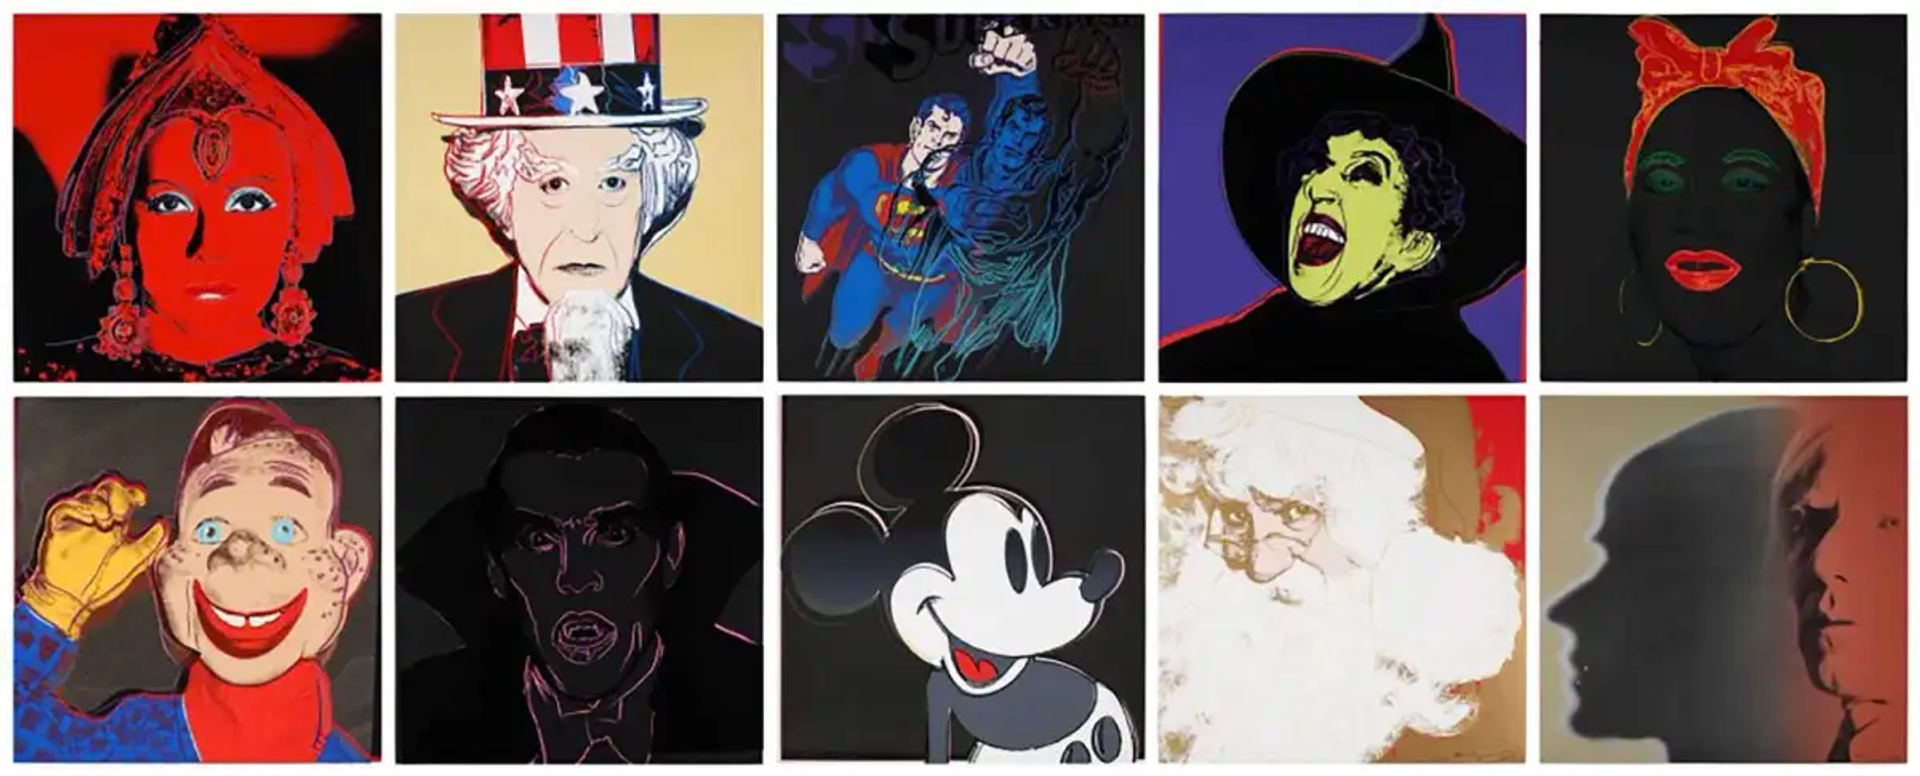 A collage of all of Warhol's works in the myth series, including depictions of Uncle Sam, Mickey Mouse, Dracula, Santa Claus and Warhol himself.